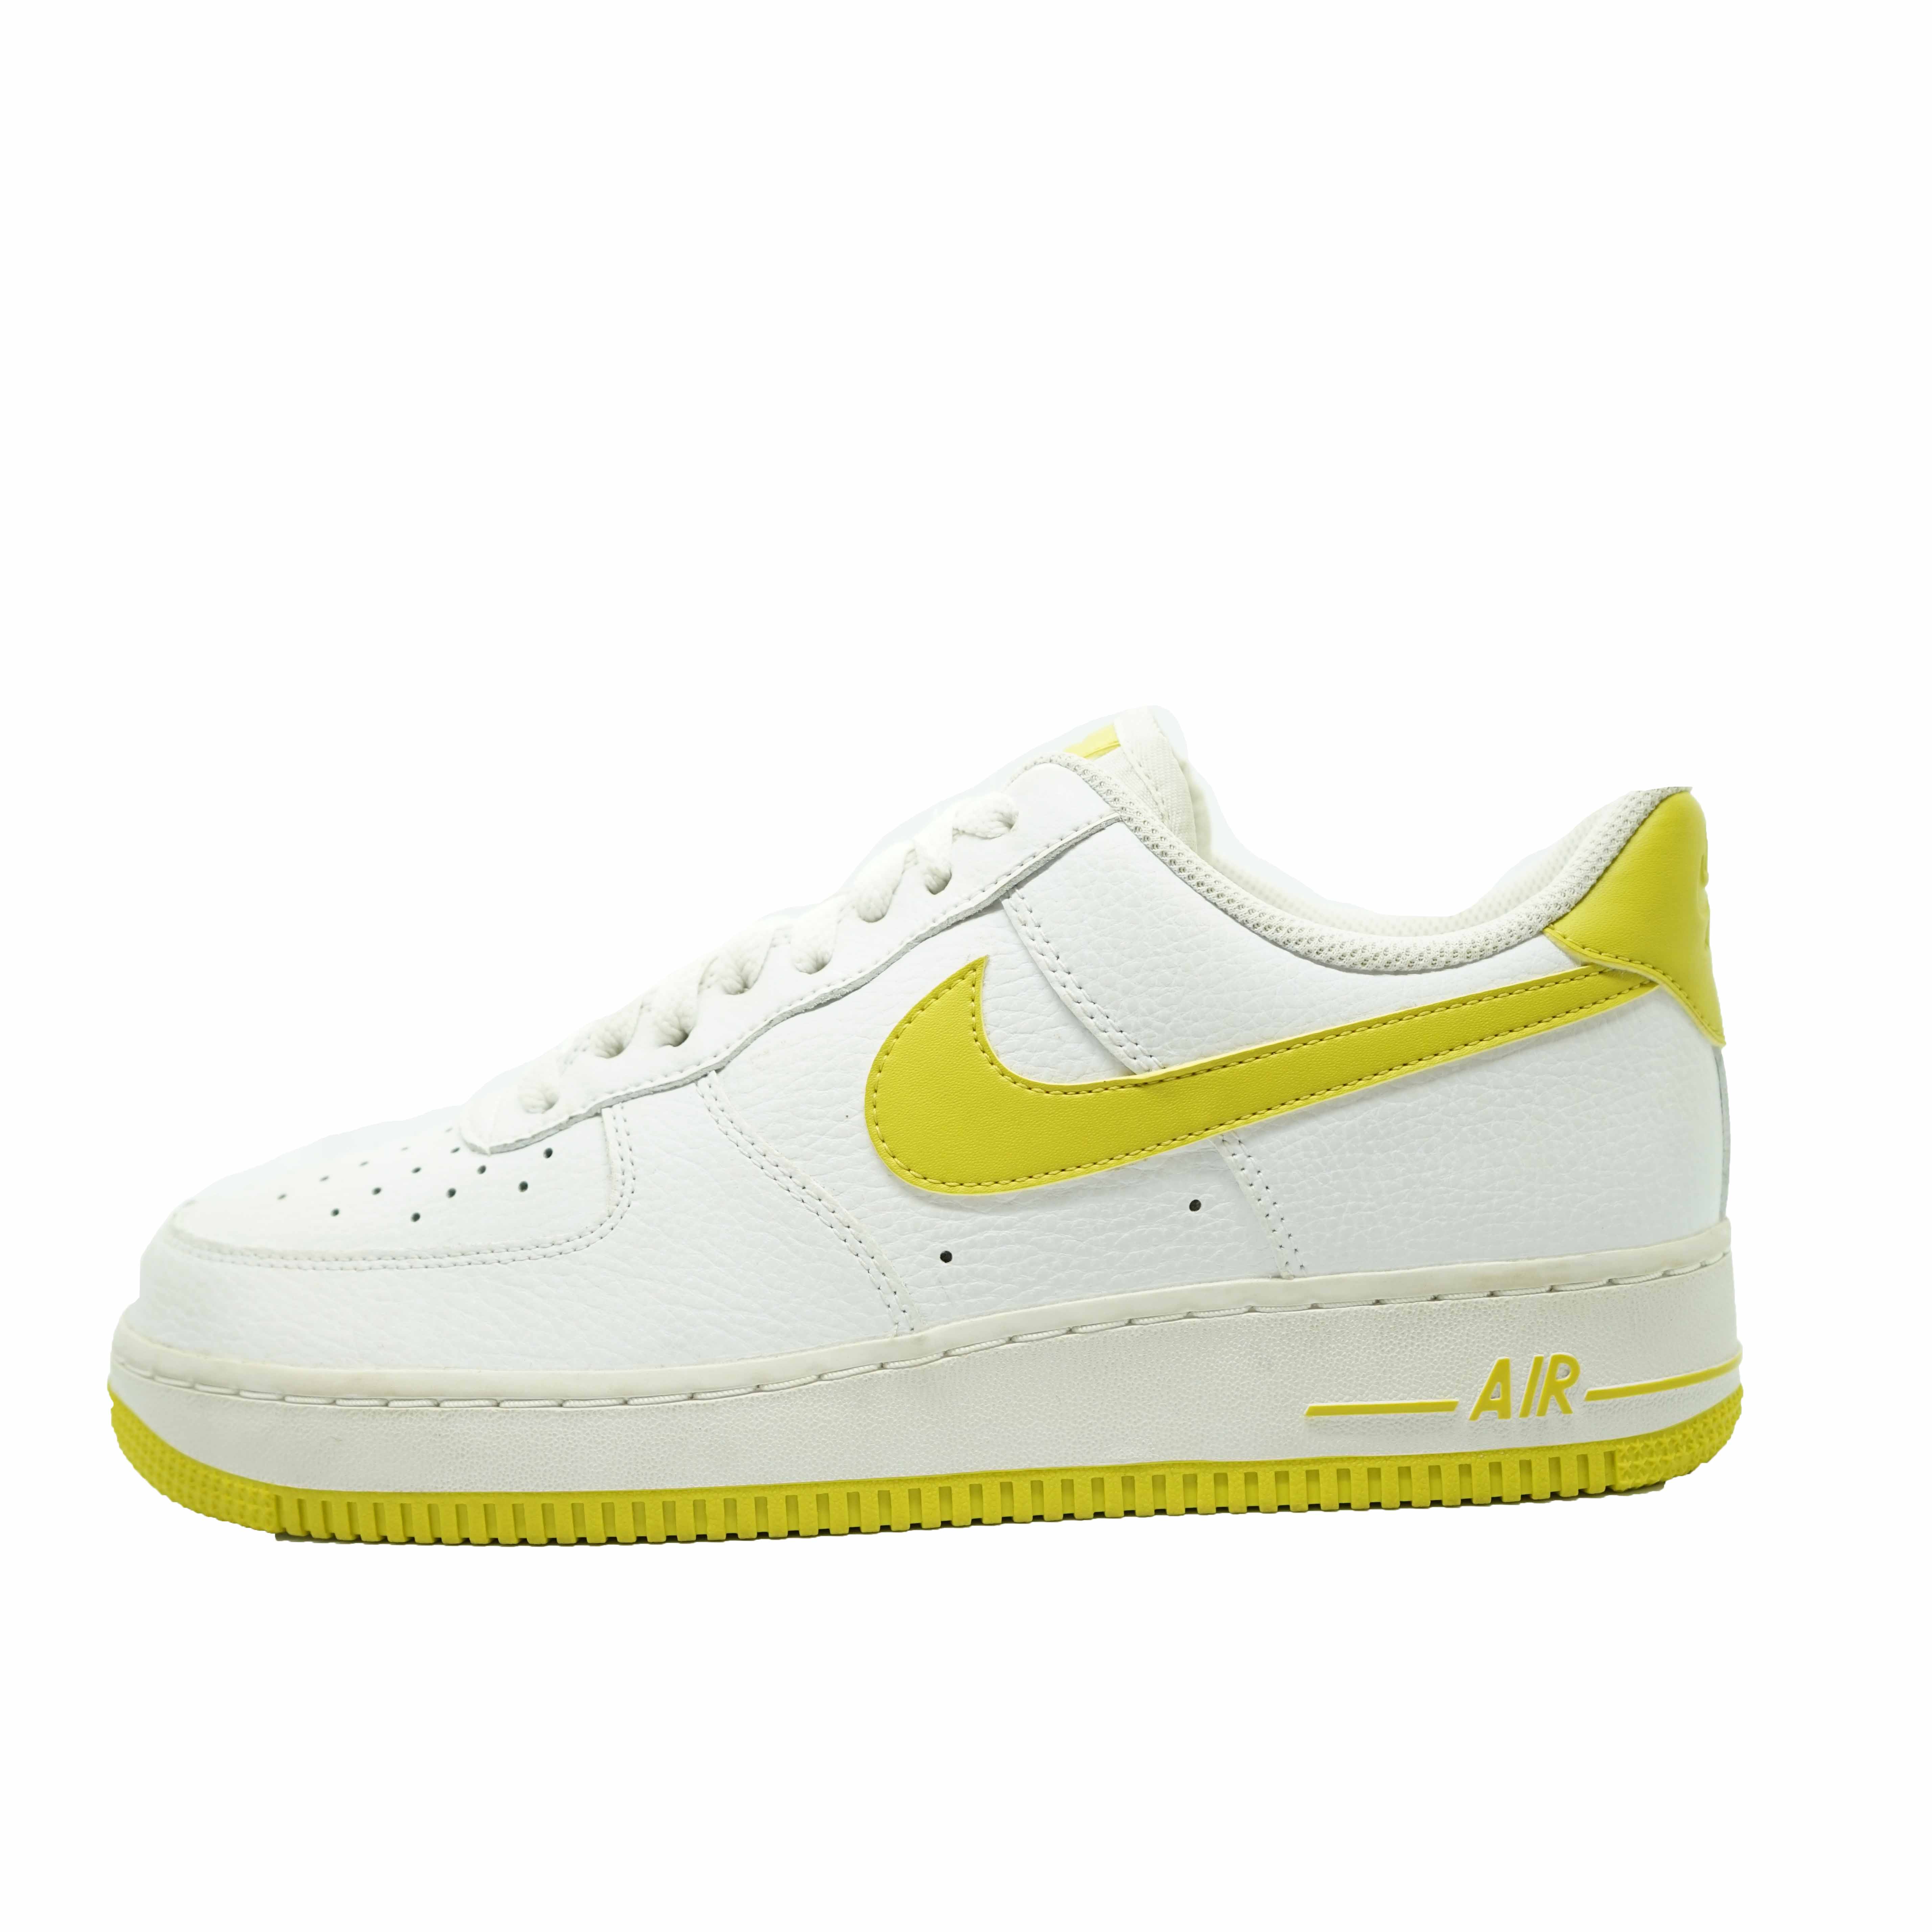 [AH0287-103] W NIKE AIR FORCE 1 LOW PATENT BRIGHT WHITE CINTRON